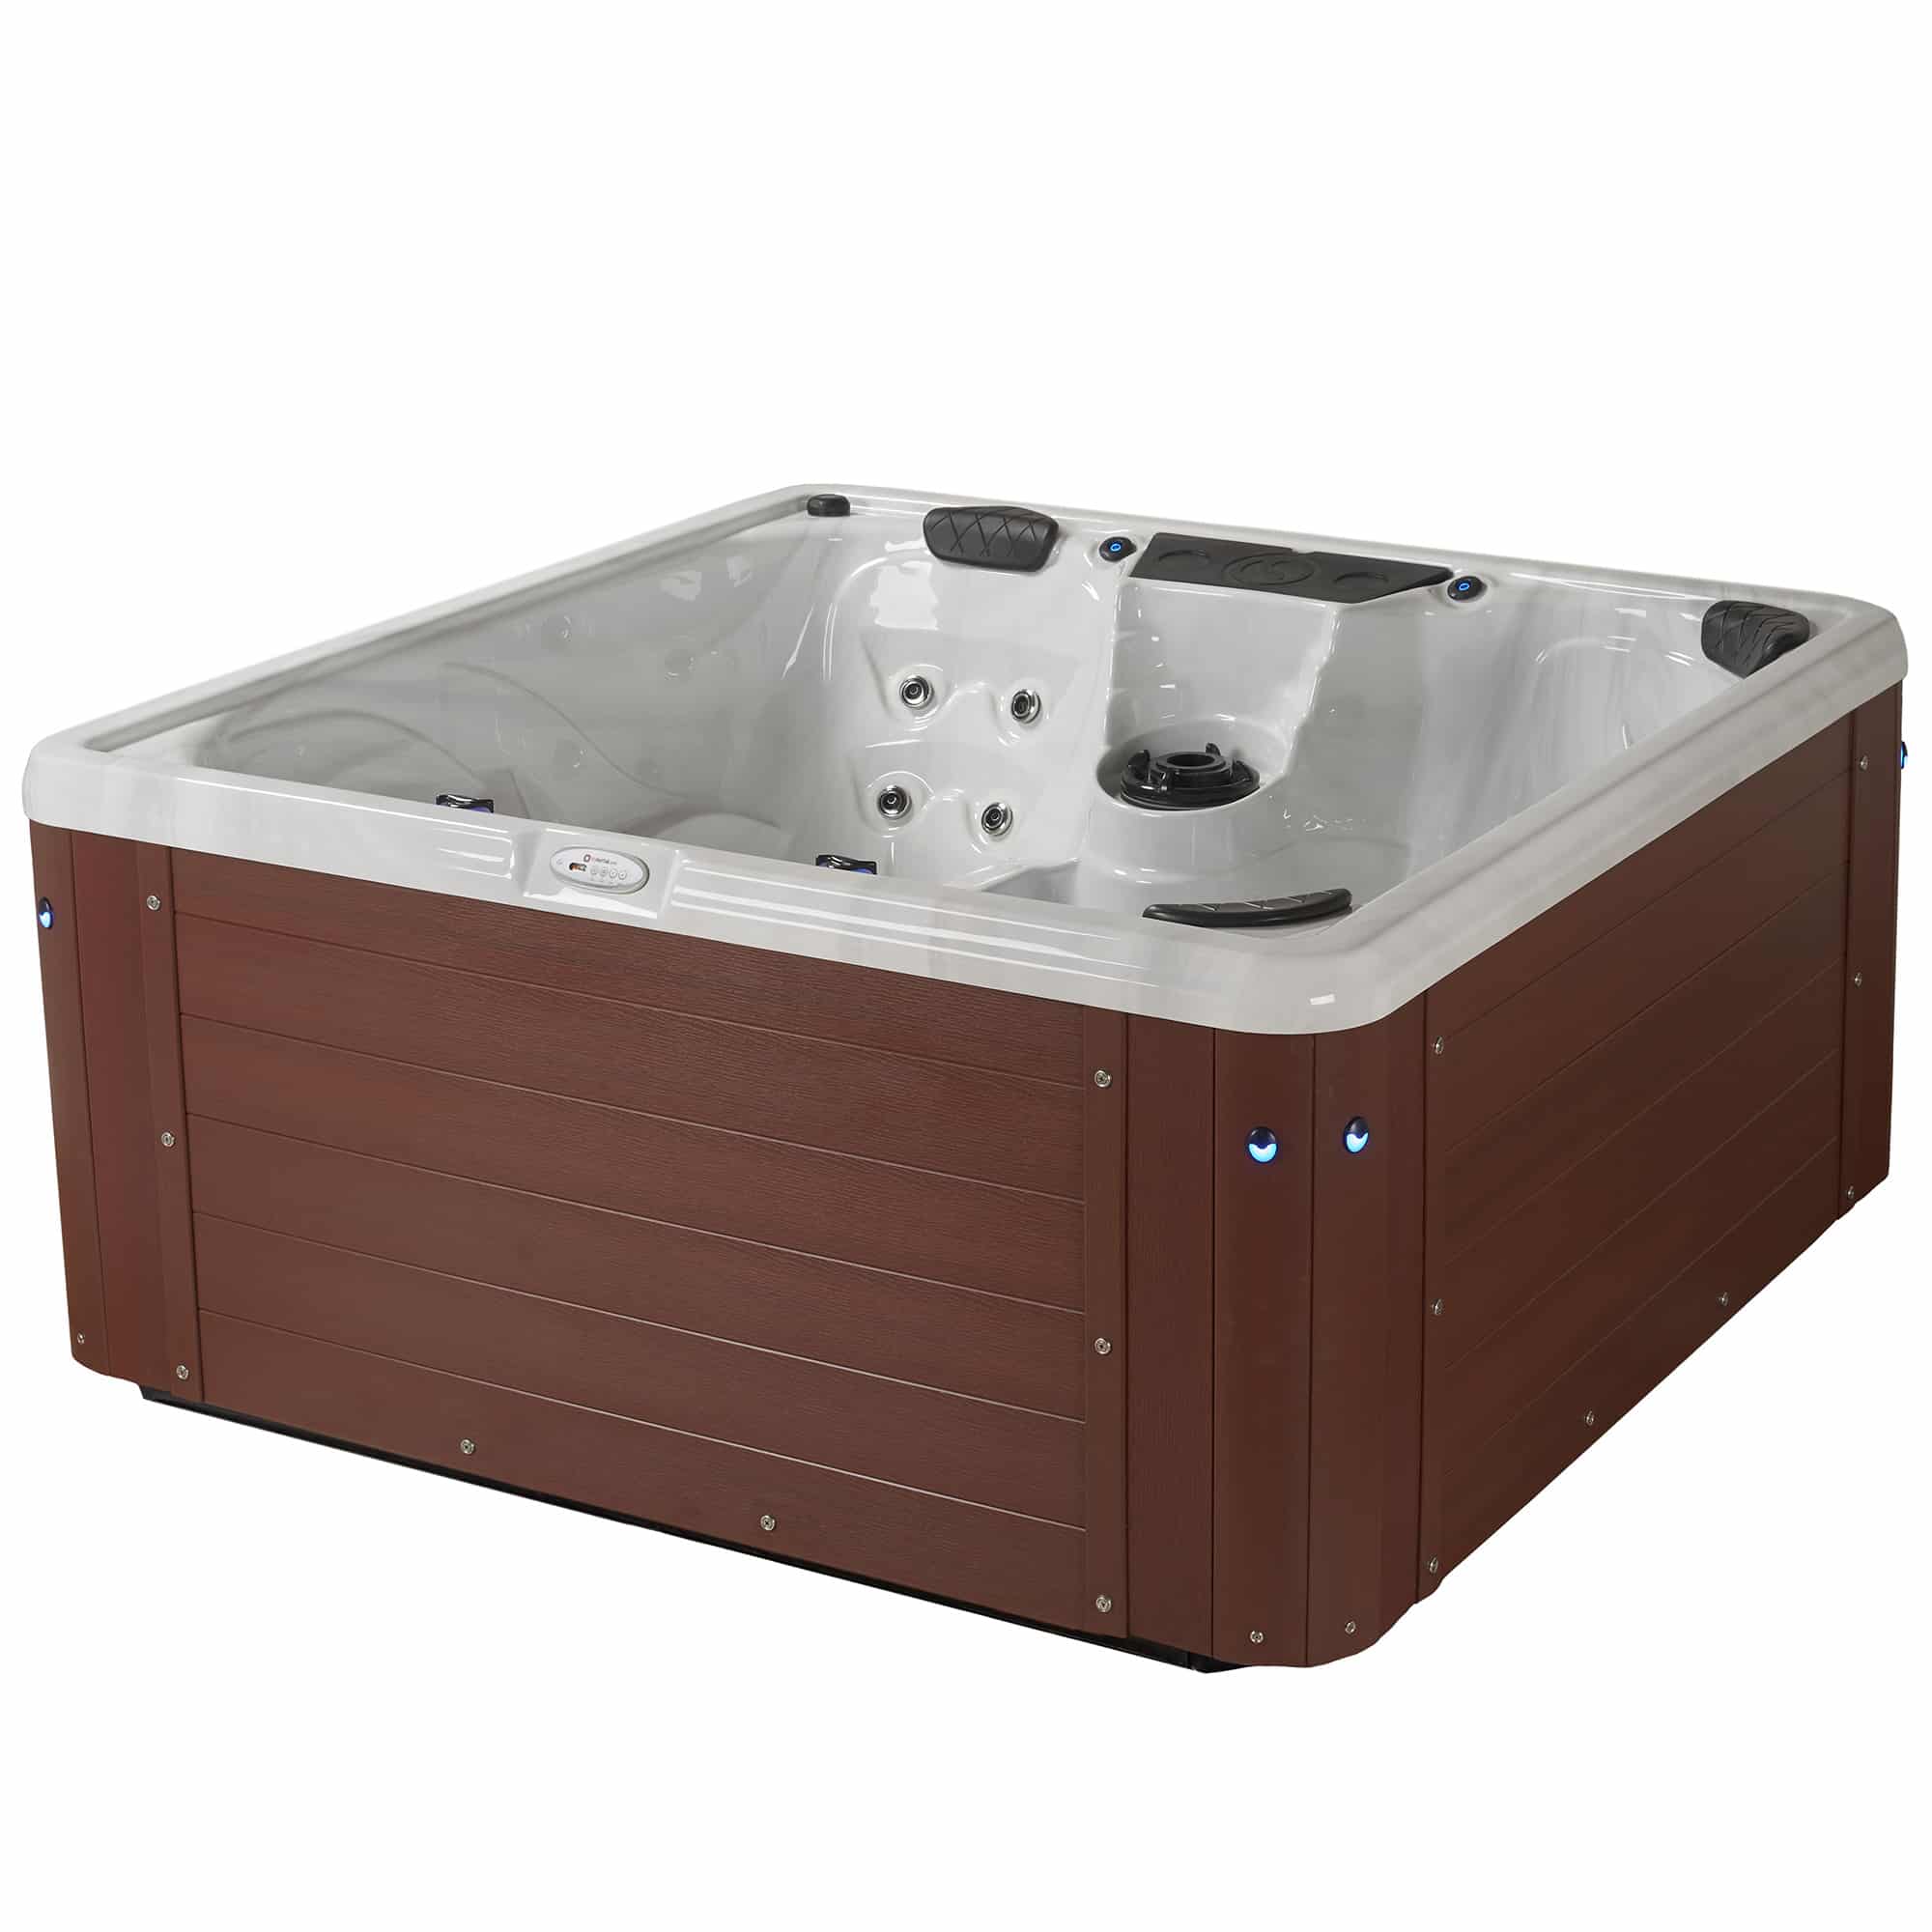 How To Clean a Hot Tub Step By Step-MHT-Acadia 40-L-redwood-empty